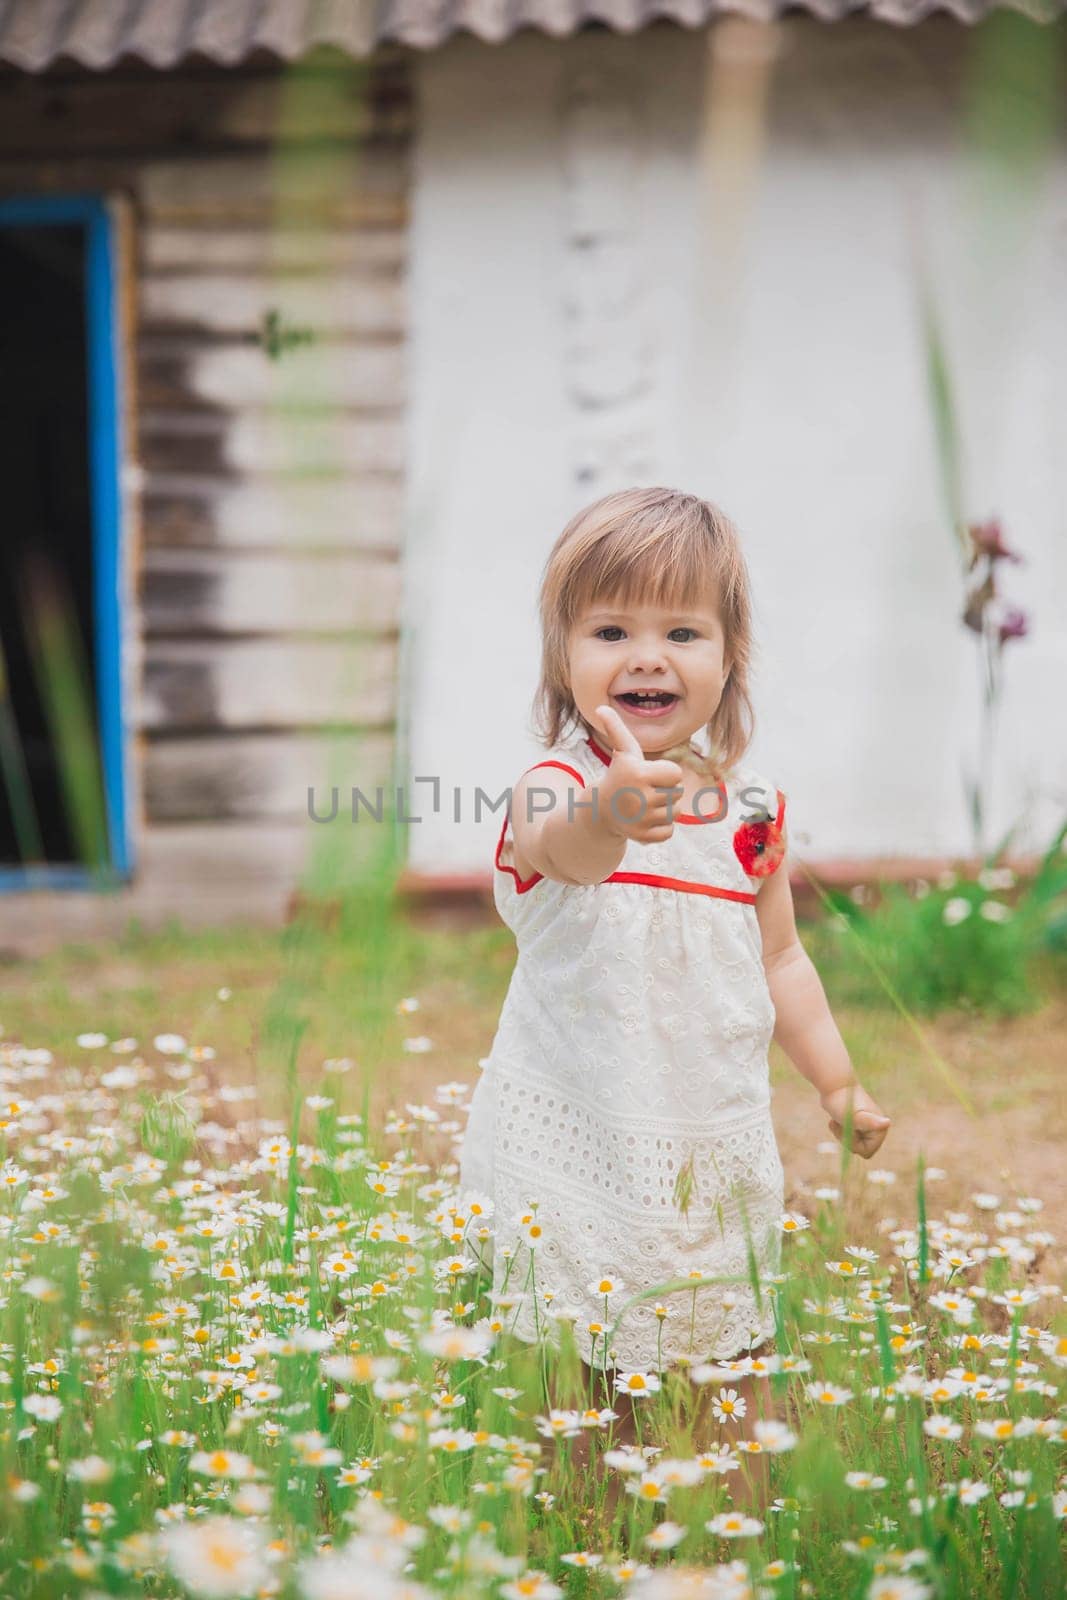 charming baby in an embroidered dress near a wooden hut.